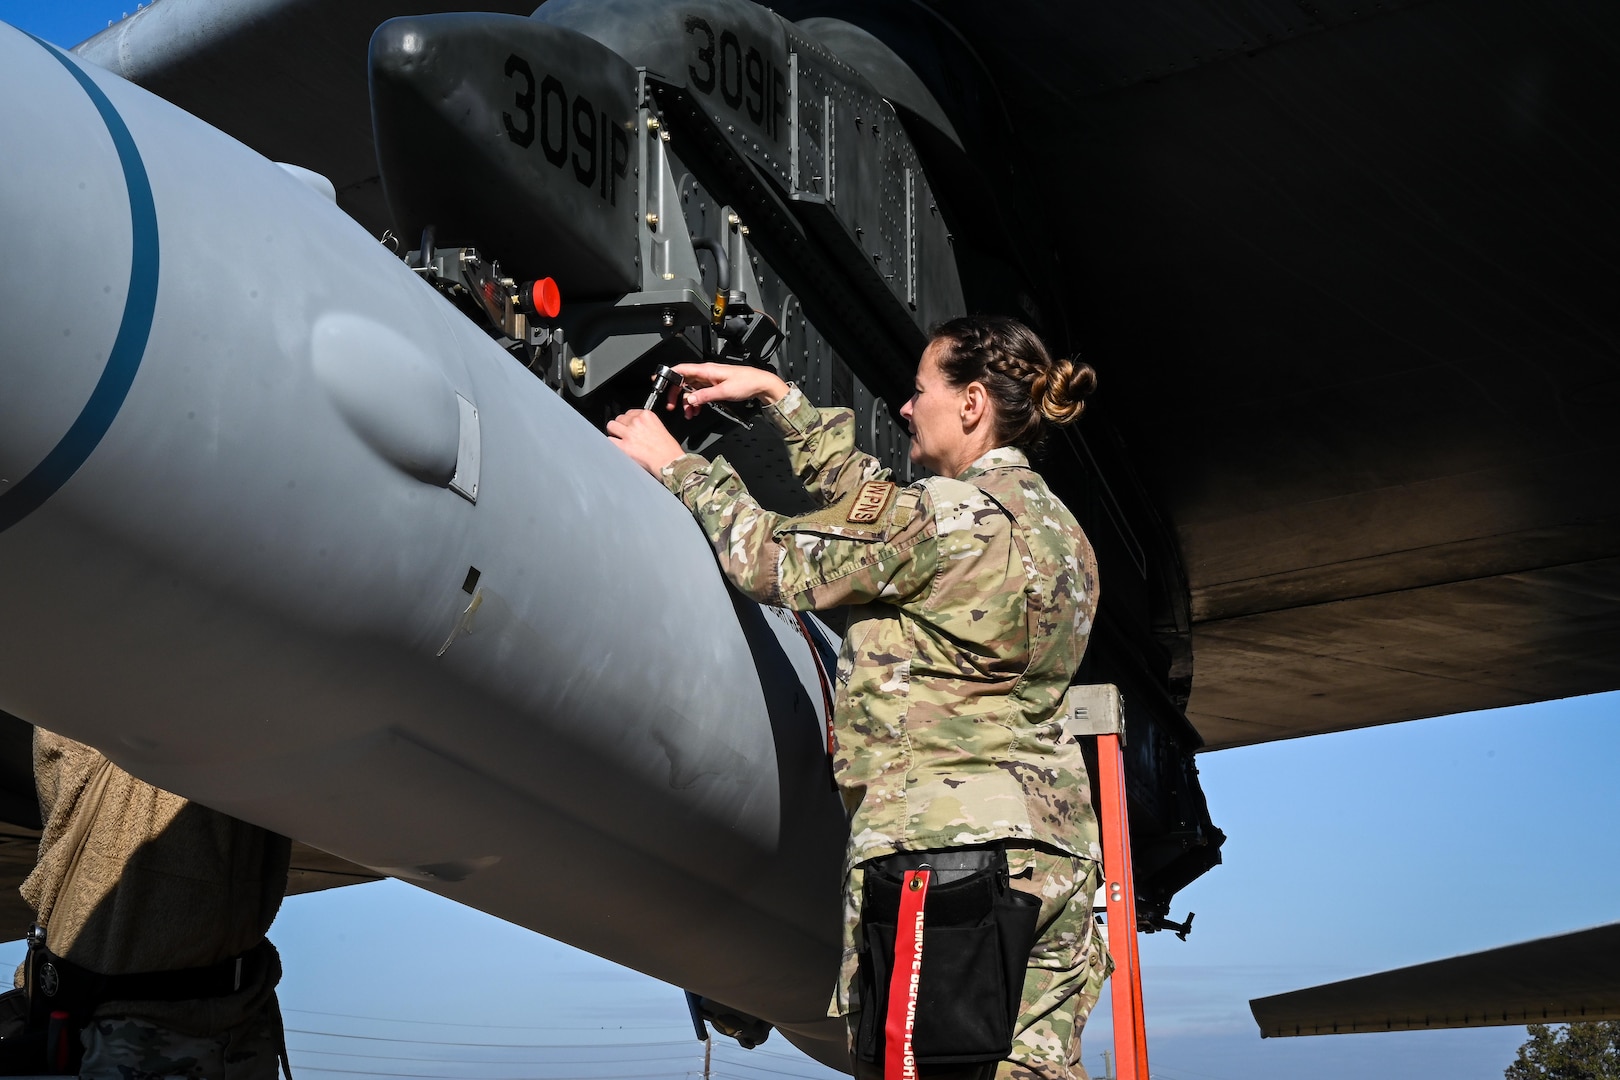 A service member works on an aircraft.